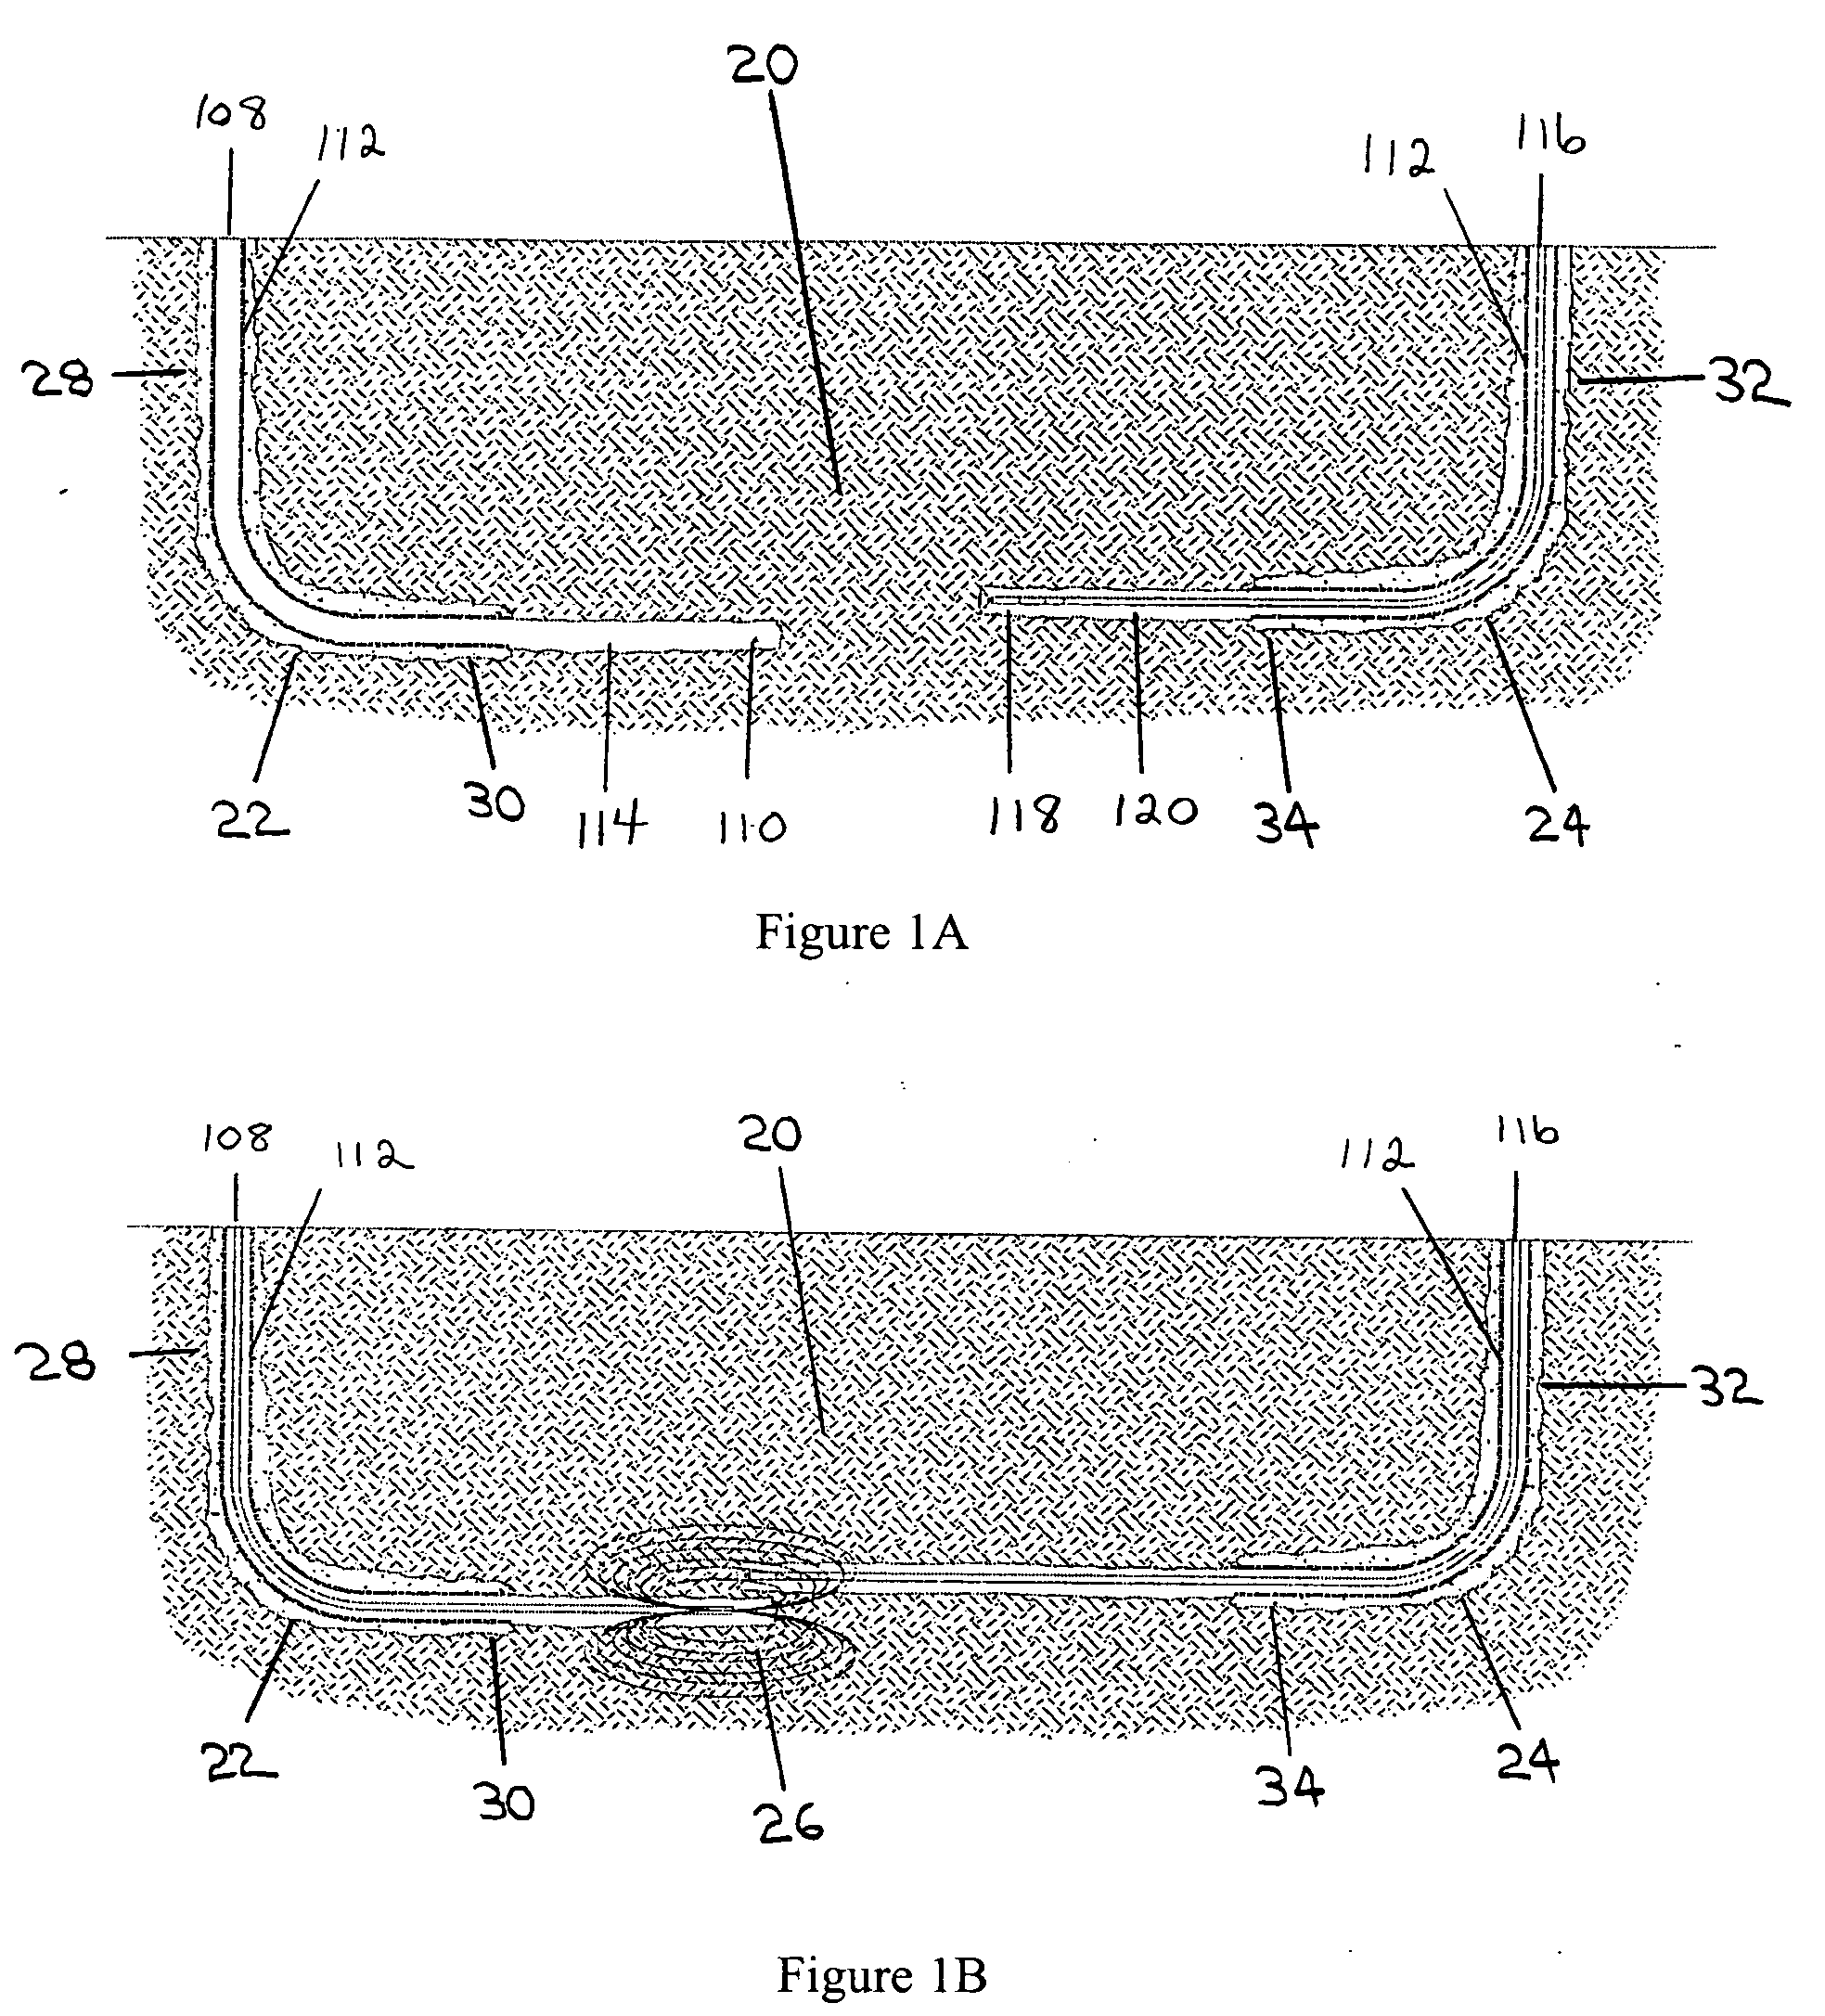 Methods and apparatus for drilling, completing and configuring U-tube boreholes